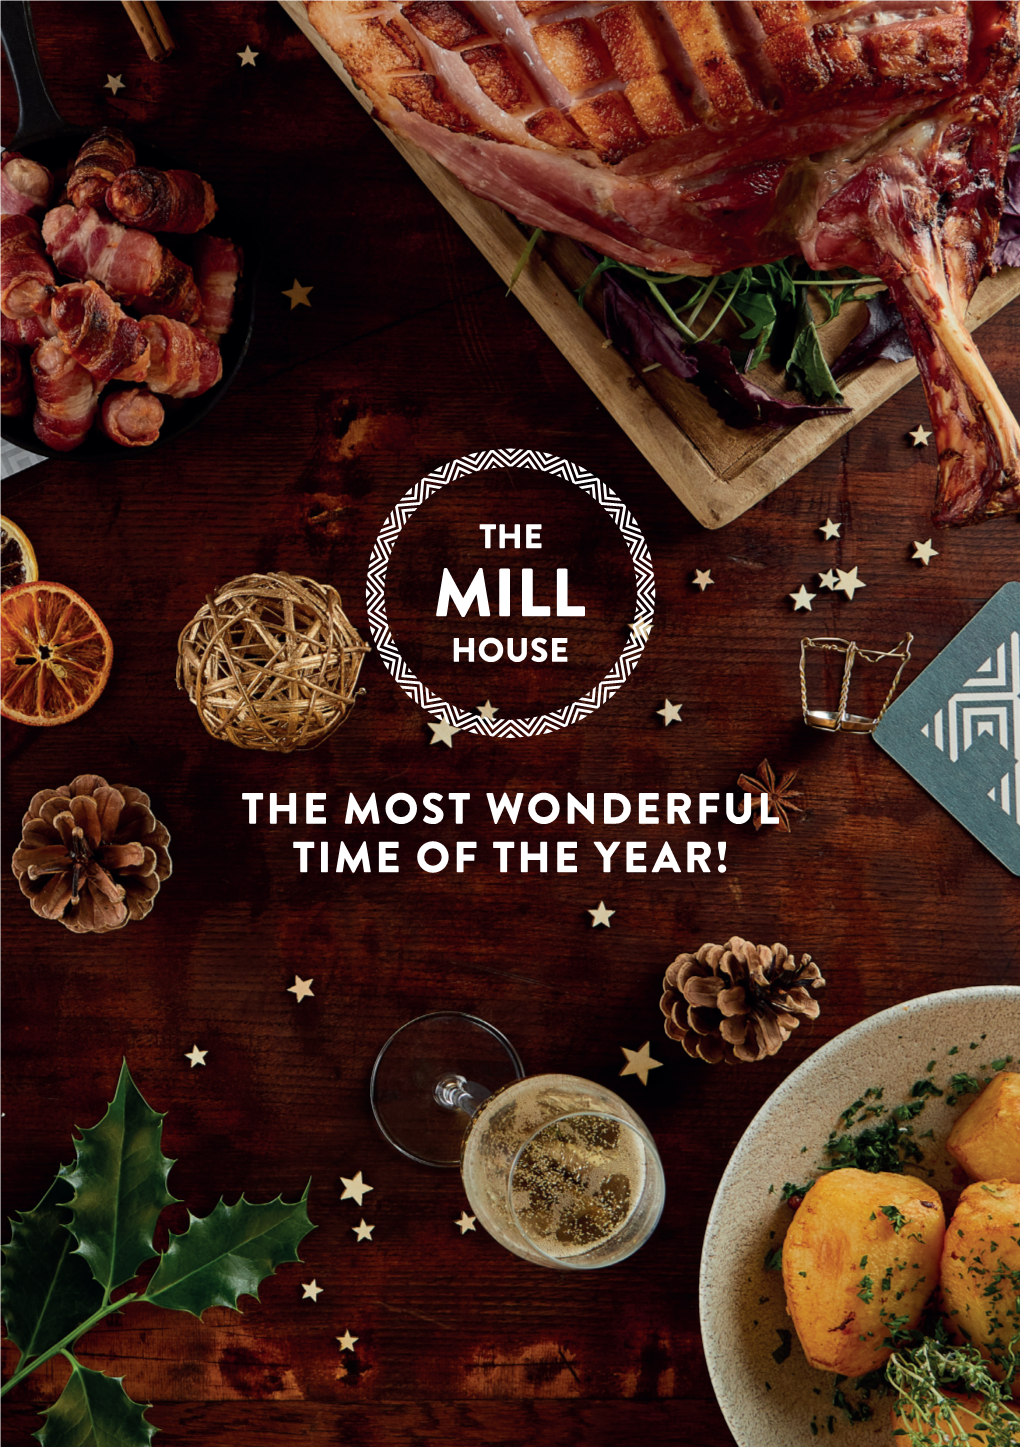 THE MOST WONDERFUL TIME of the YEAR! Welcome to the Mill House, Part of the Multi-Award Winning Buzzworks Holdings Group